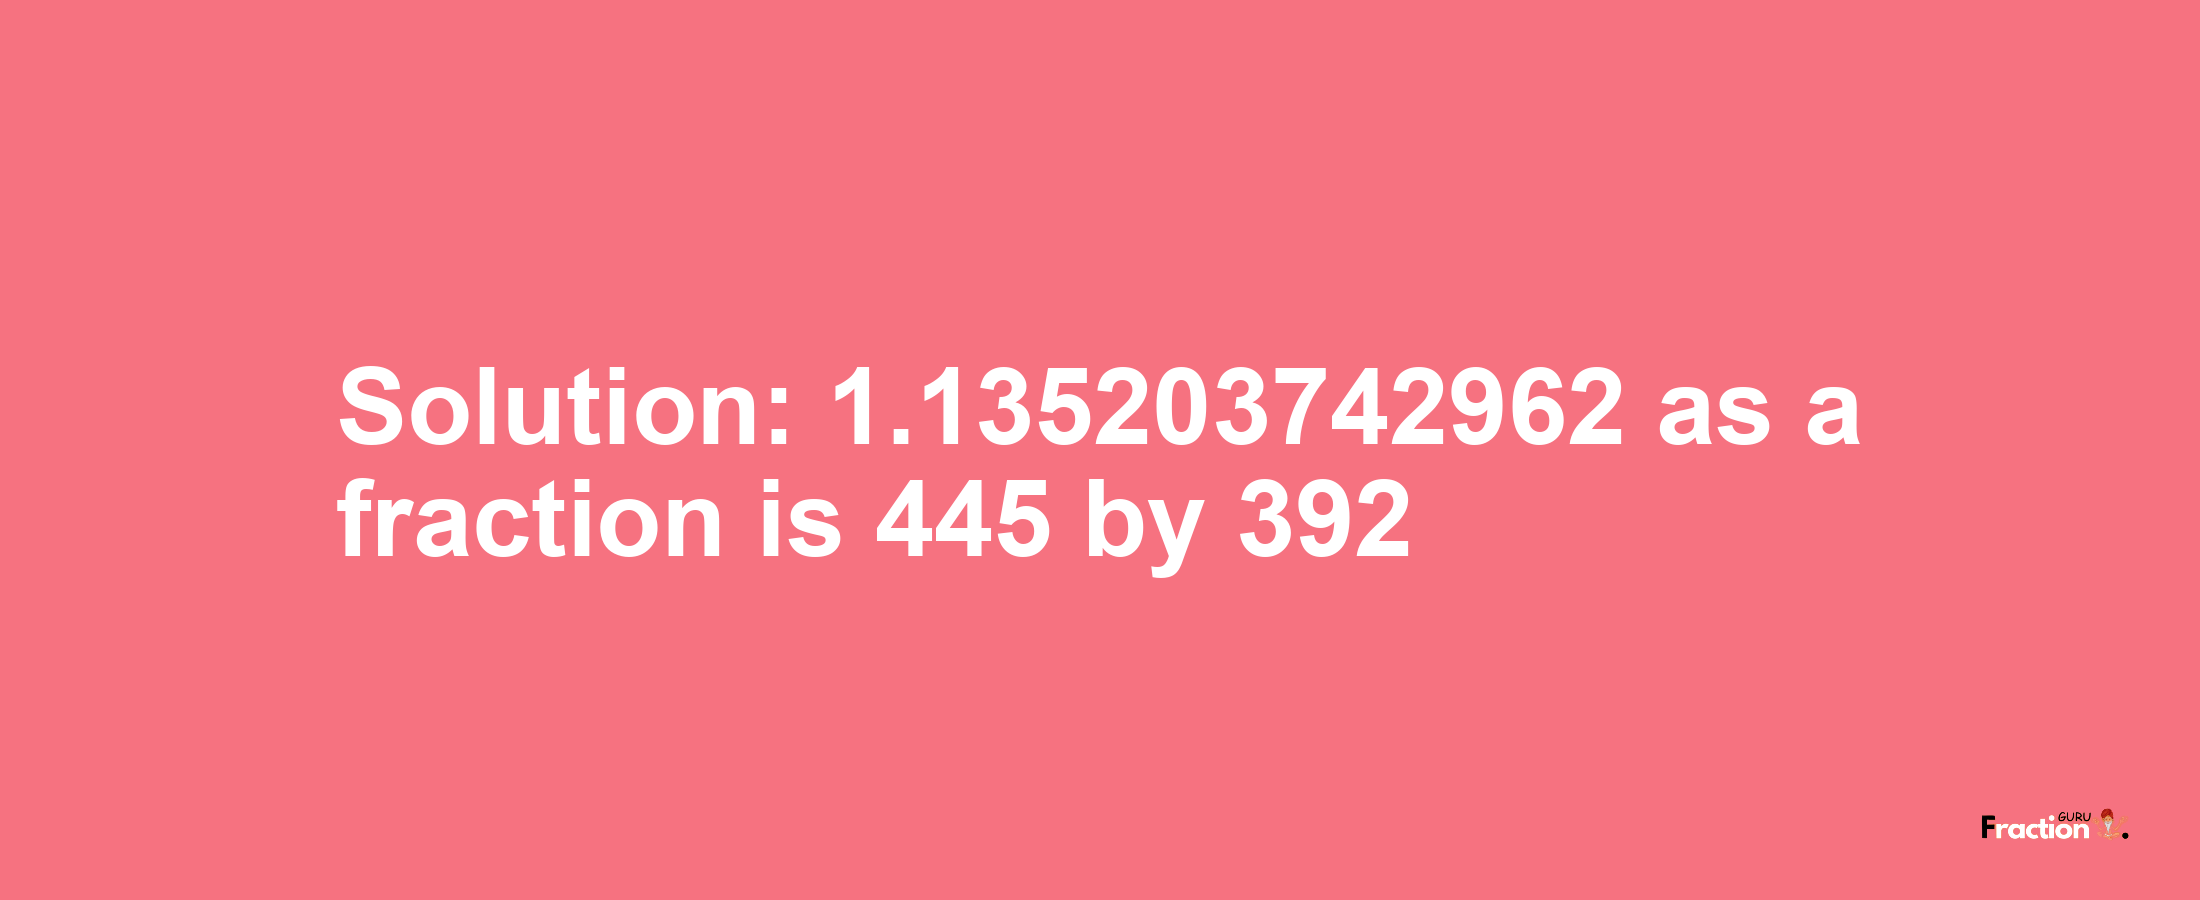 Solution:1.135203742962 as a fraction is 445/392